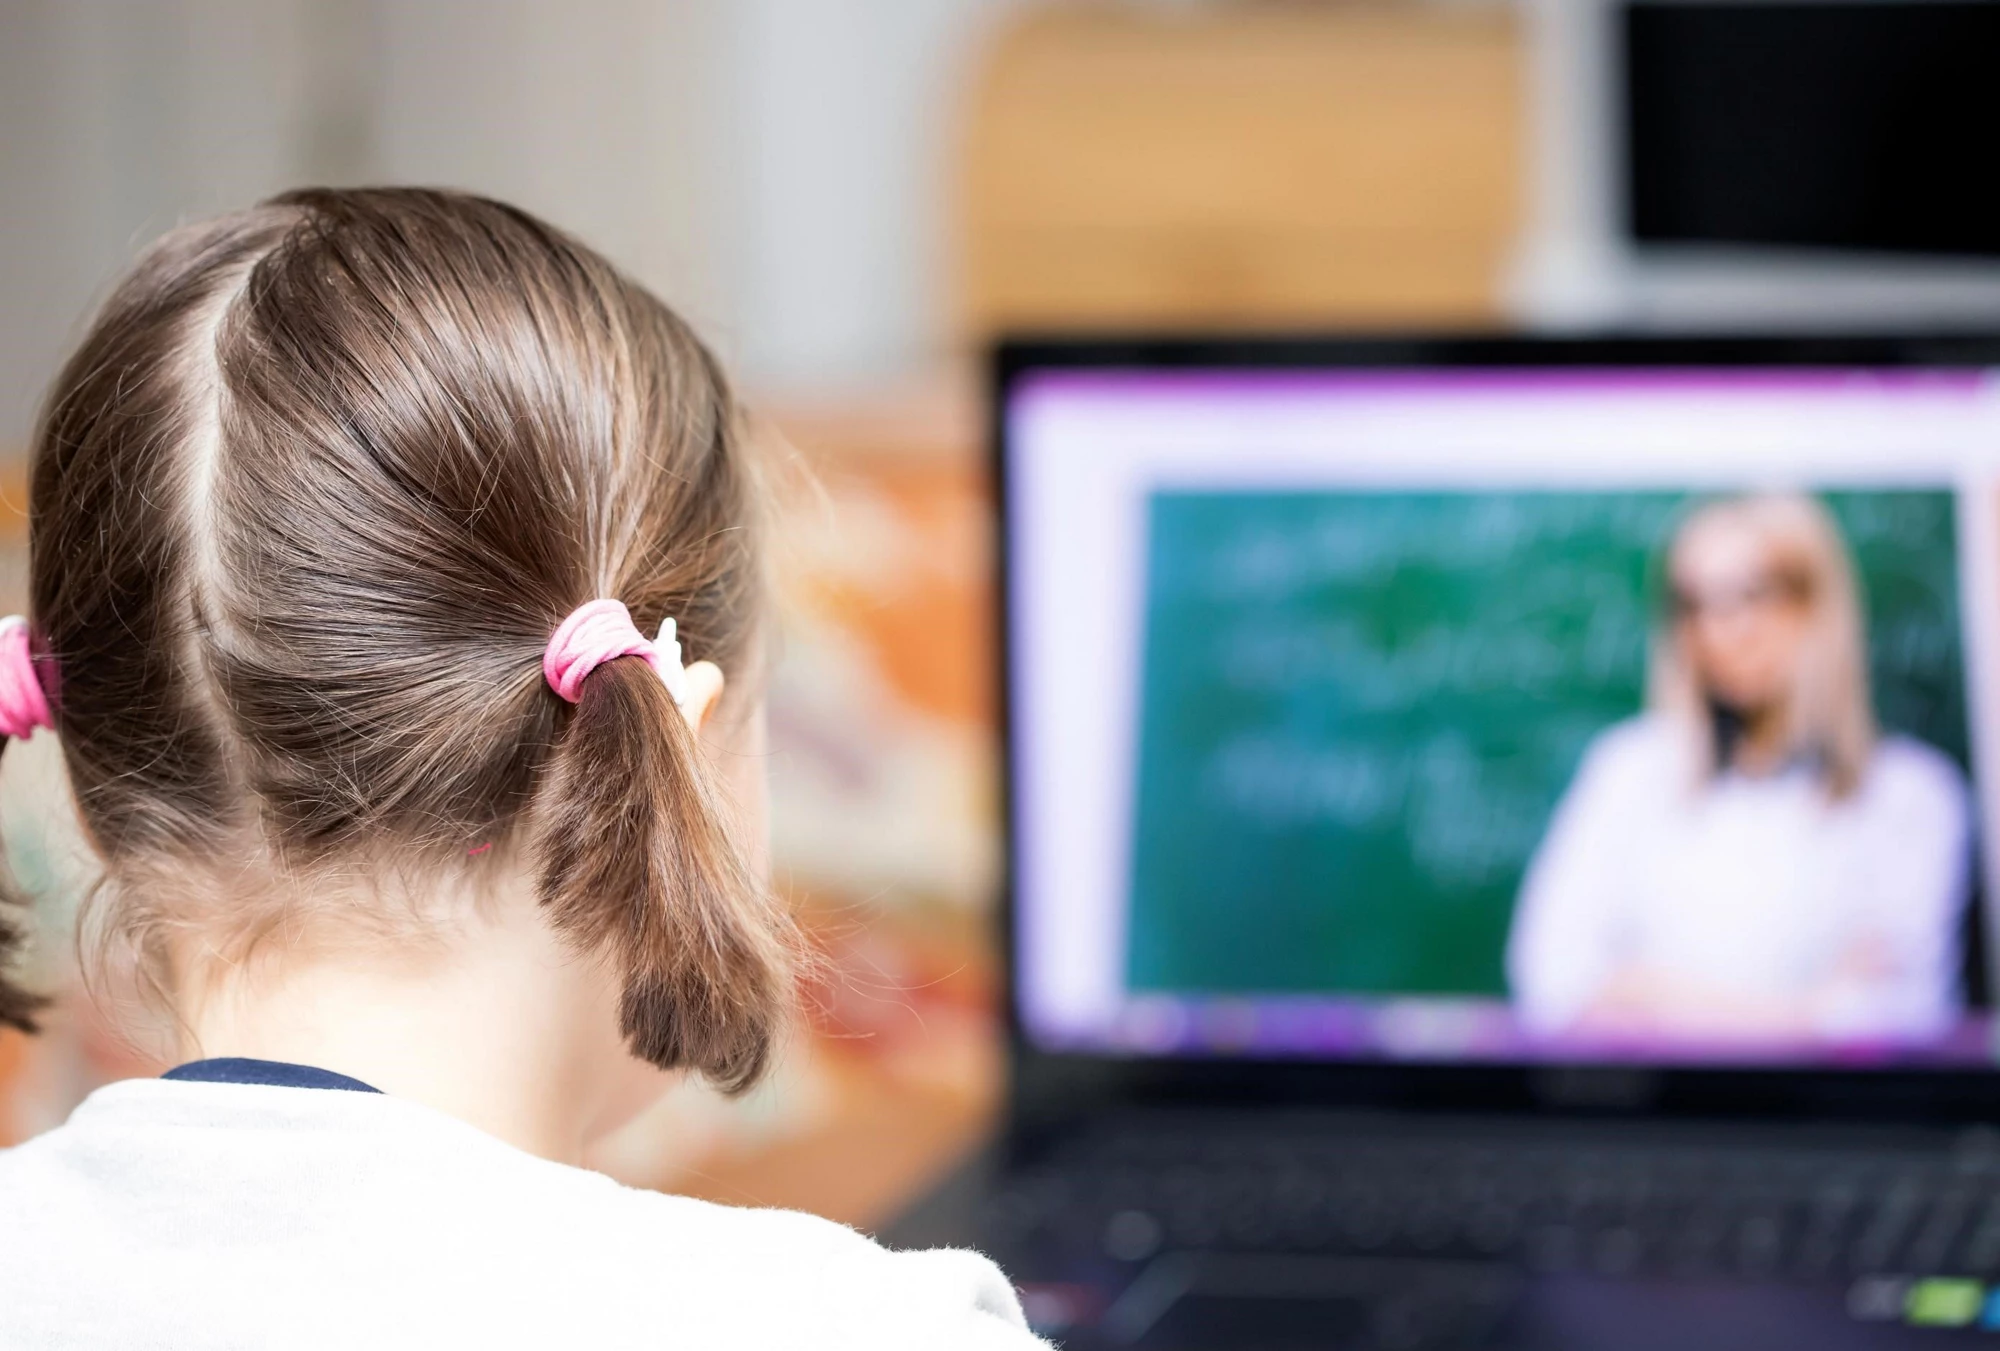 School girl watching online education classes and doing school homework. COVID-19 pandemic forces children online learning. Photo credit: Shutterstock